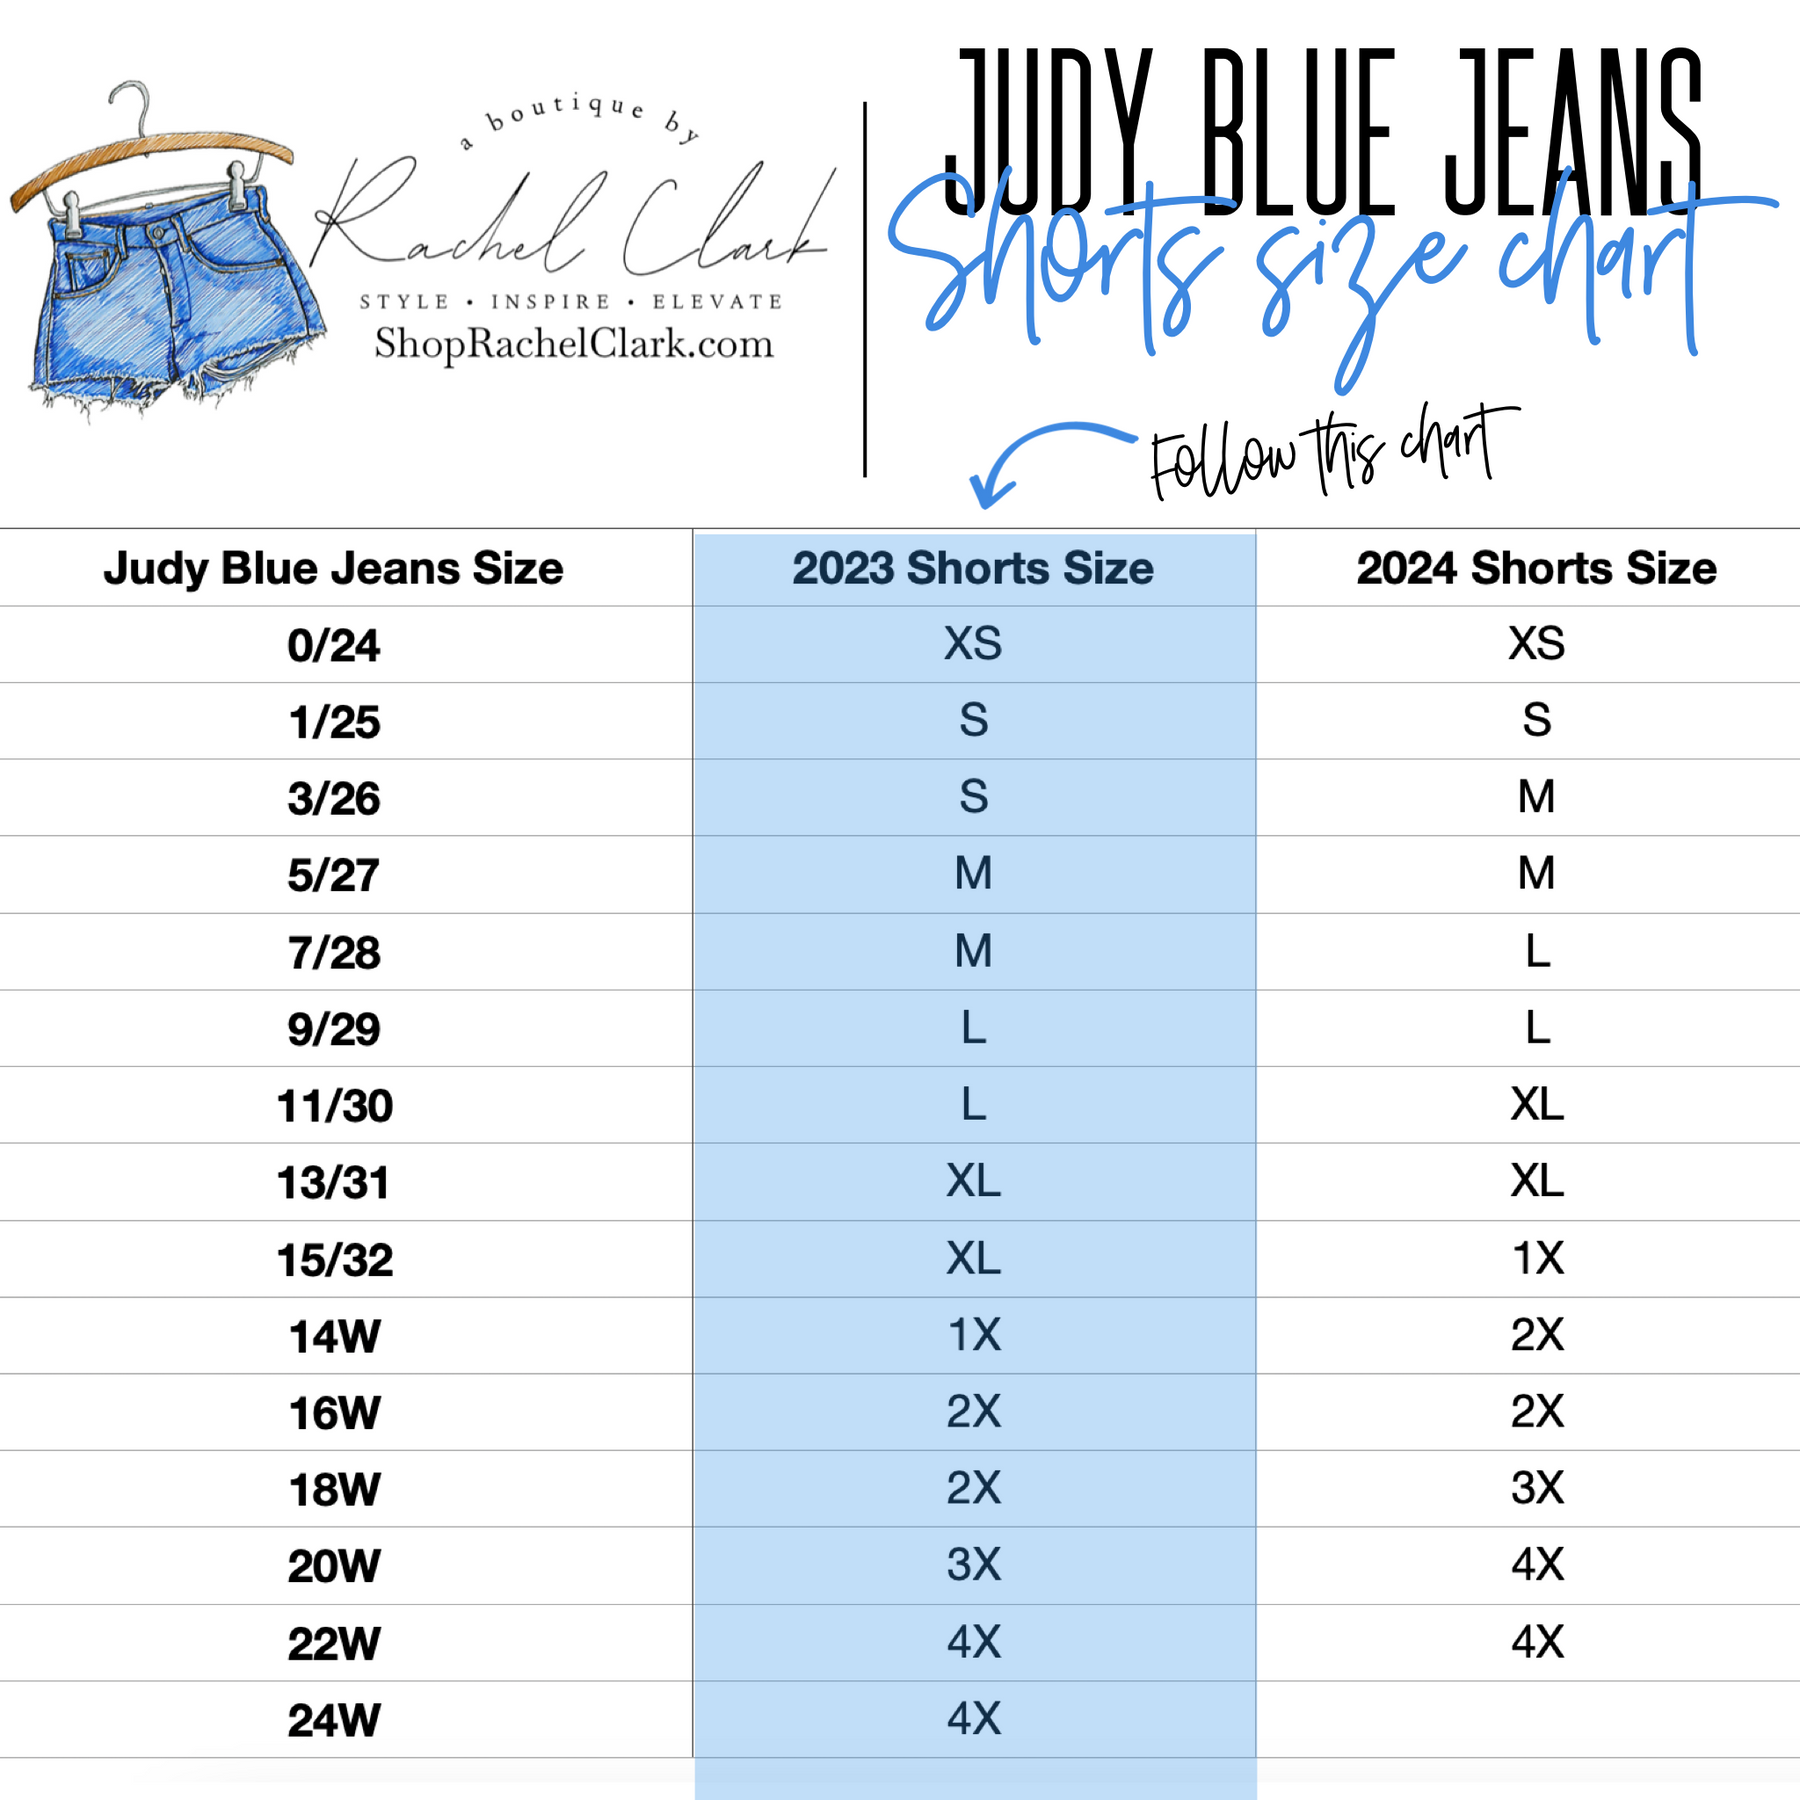 Judy Blue Mid-Rise Patch Cut Off Shorts